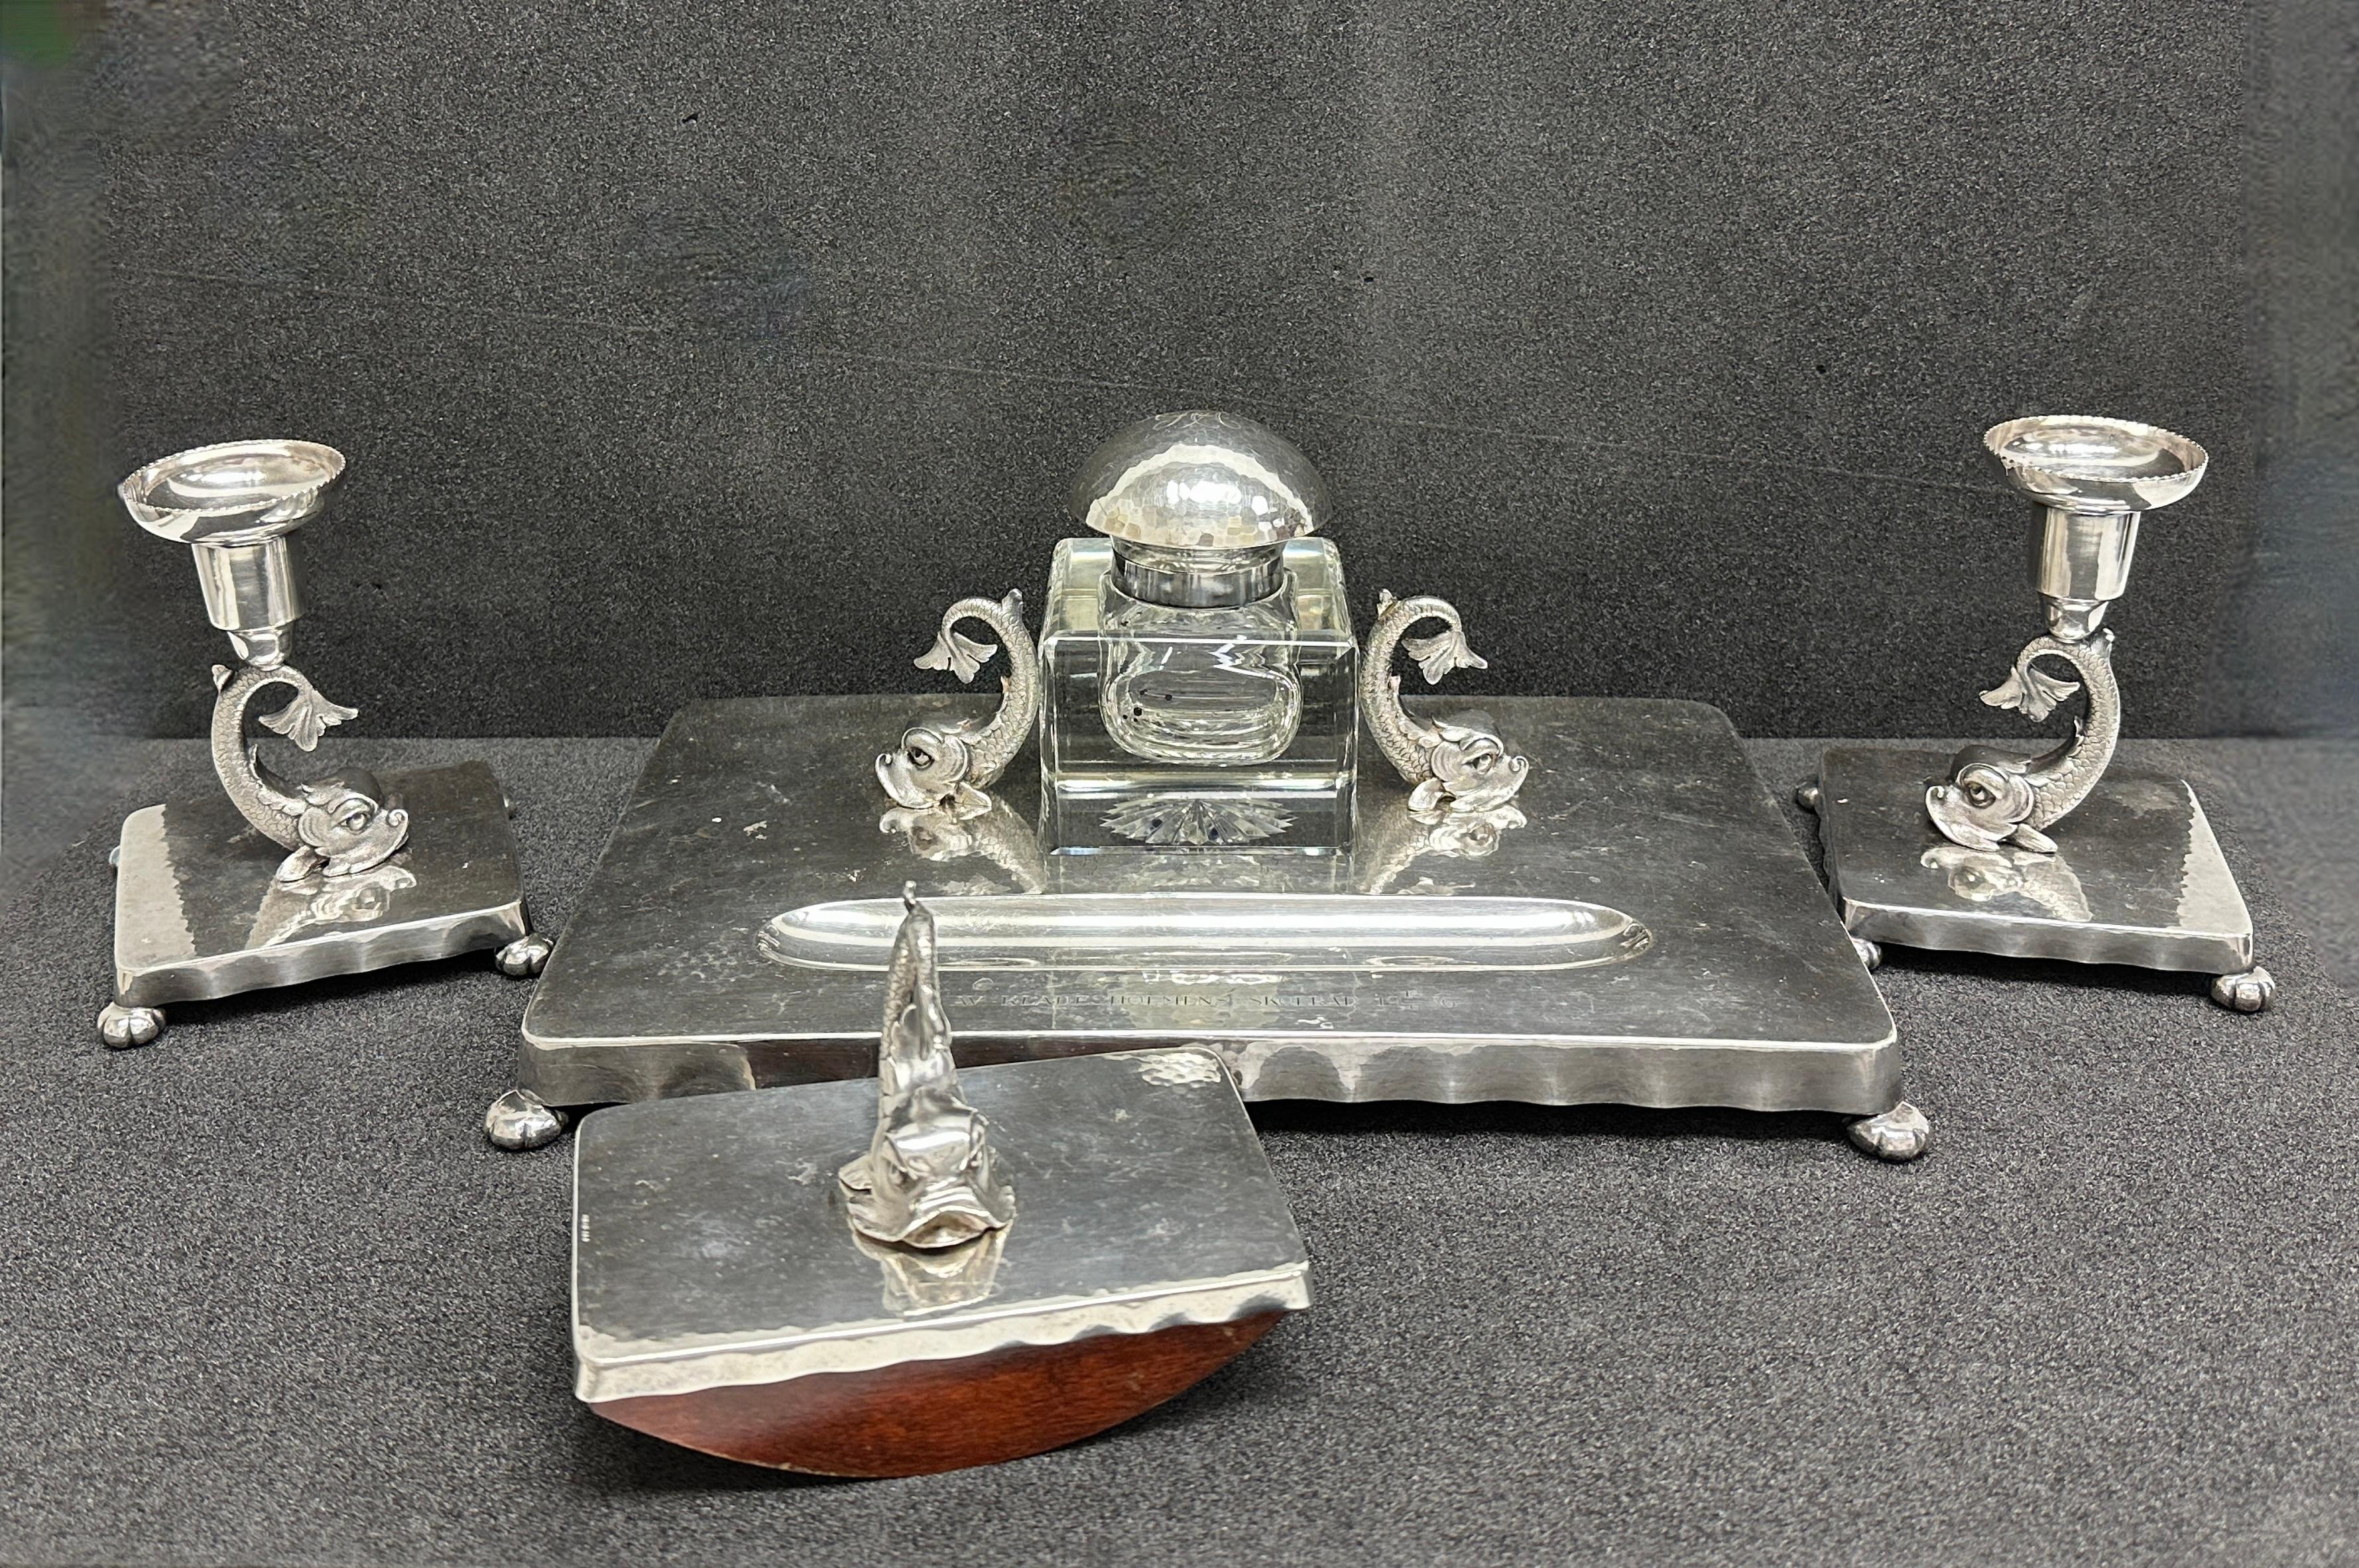 Classic 1930s dolphin fish desktop accessories inkwell, blotter and candlestick set. Made of silver plated metal and crystal glass. Nice addition to your writing desk or just to display them in your room. Found at an estate sale in Stockholm Sweden.